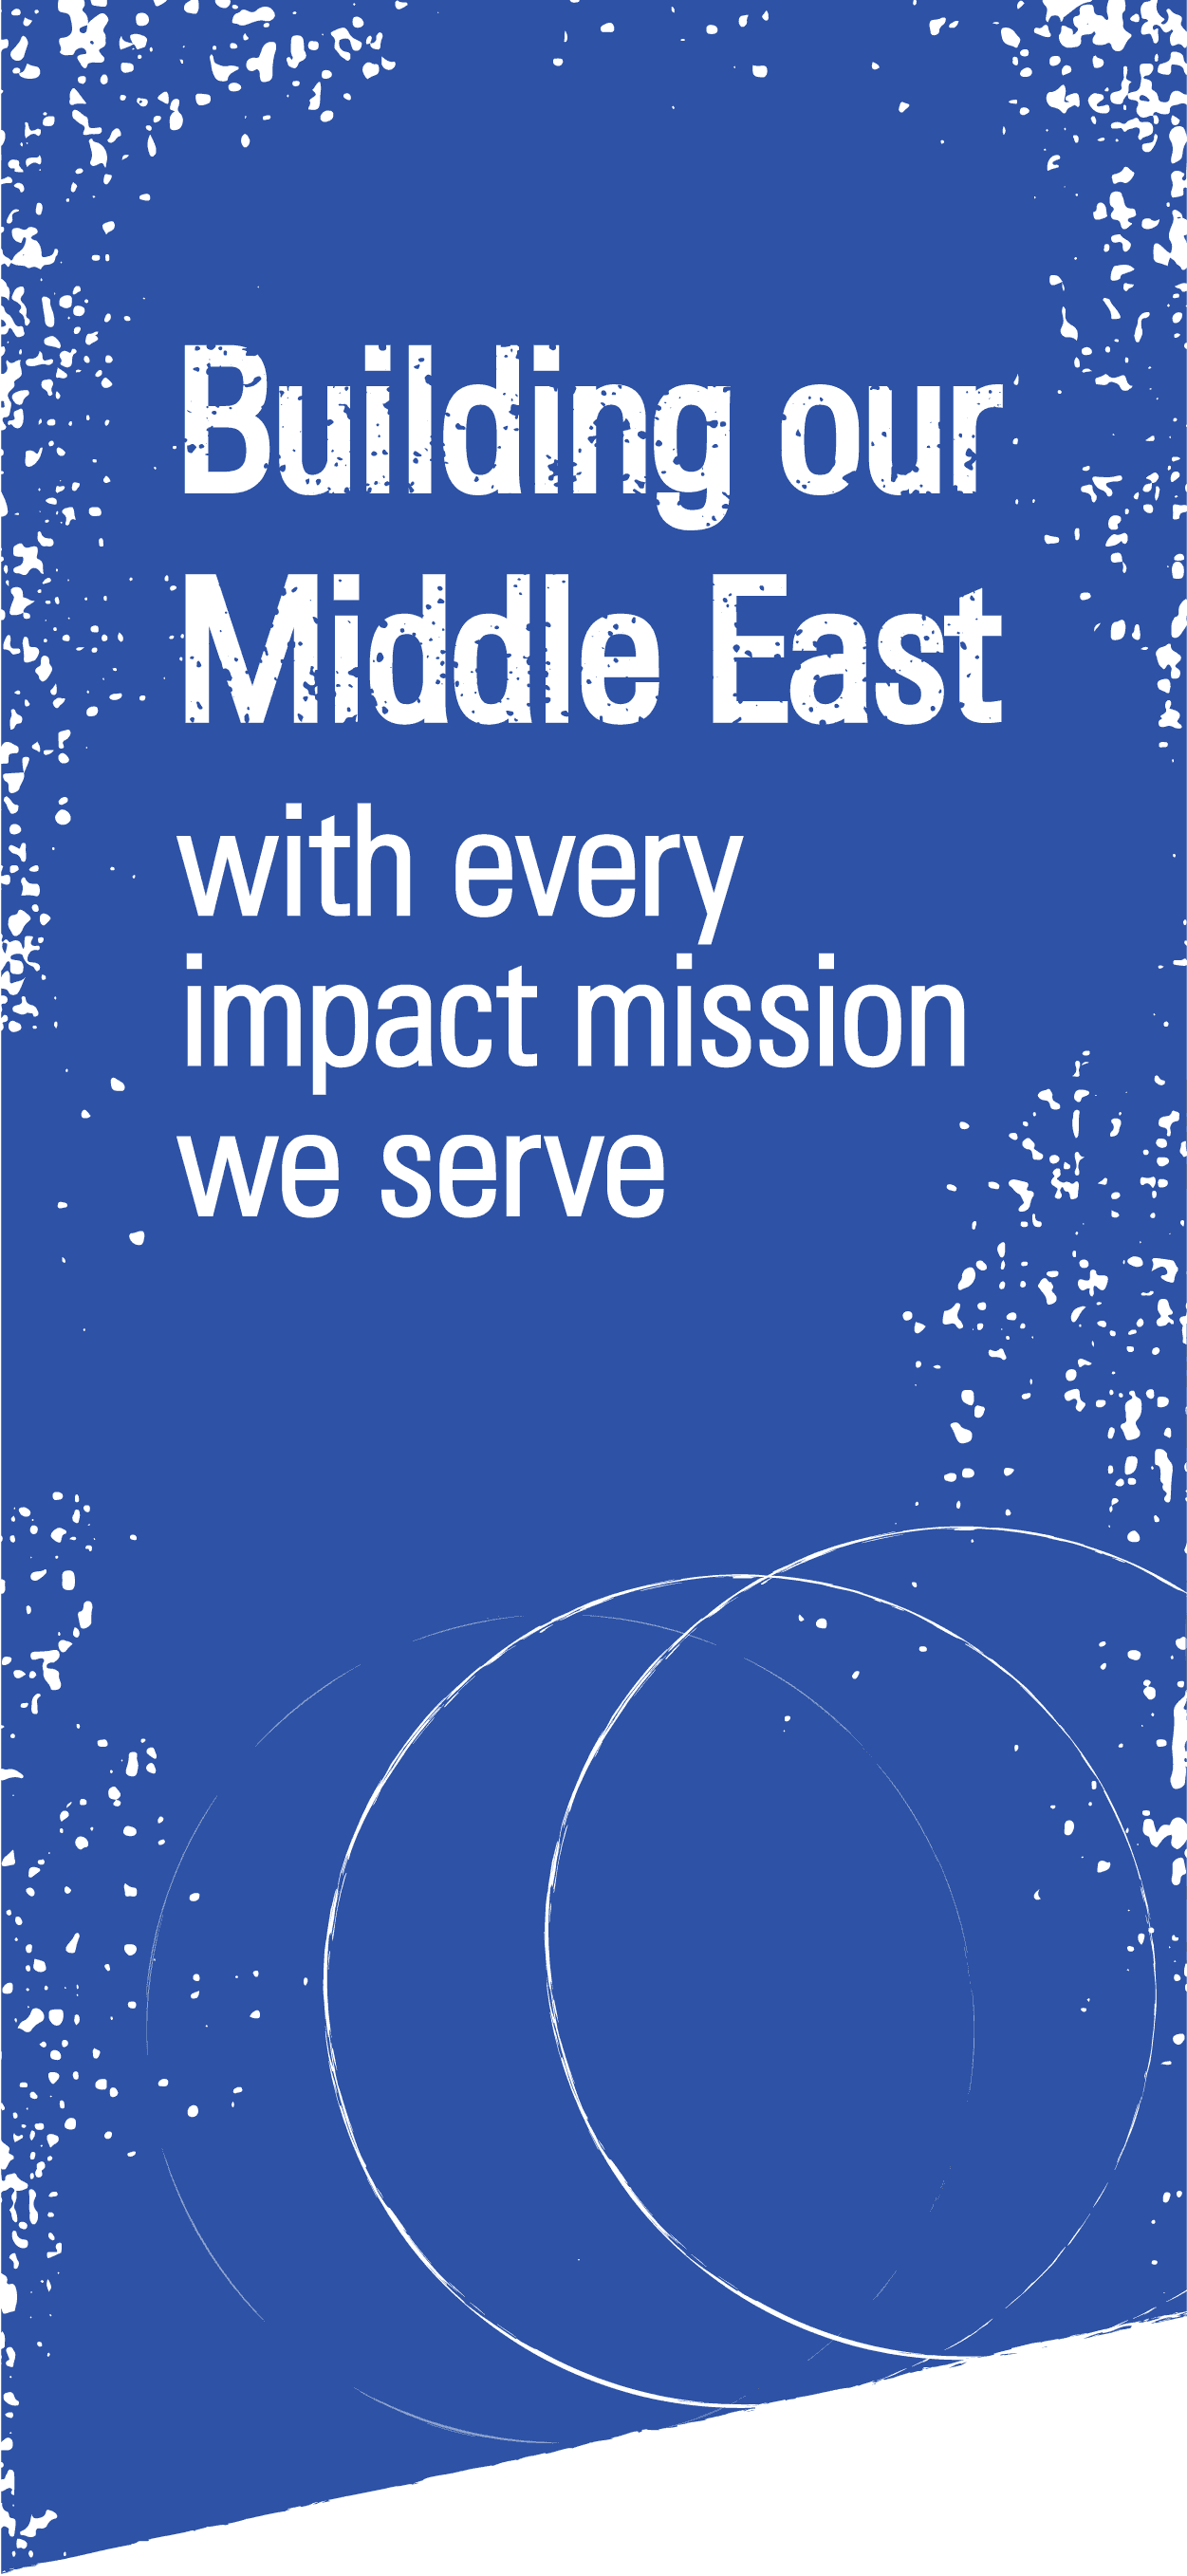 Impact missions, social investment, sustainable collective impact